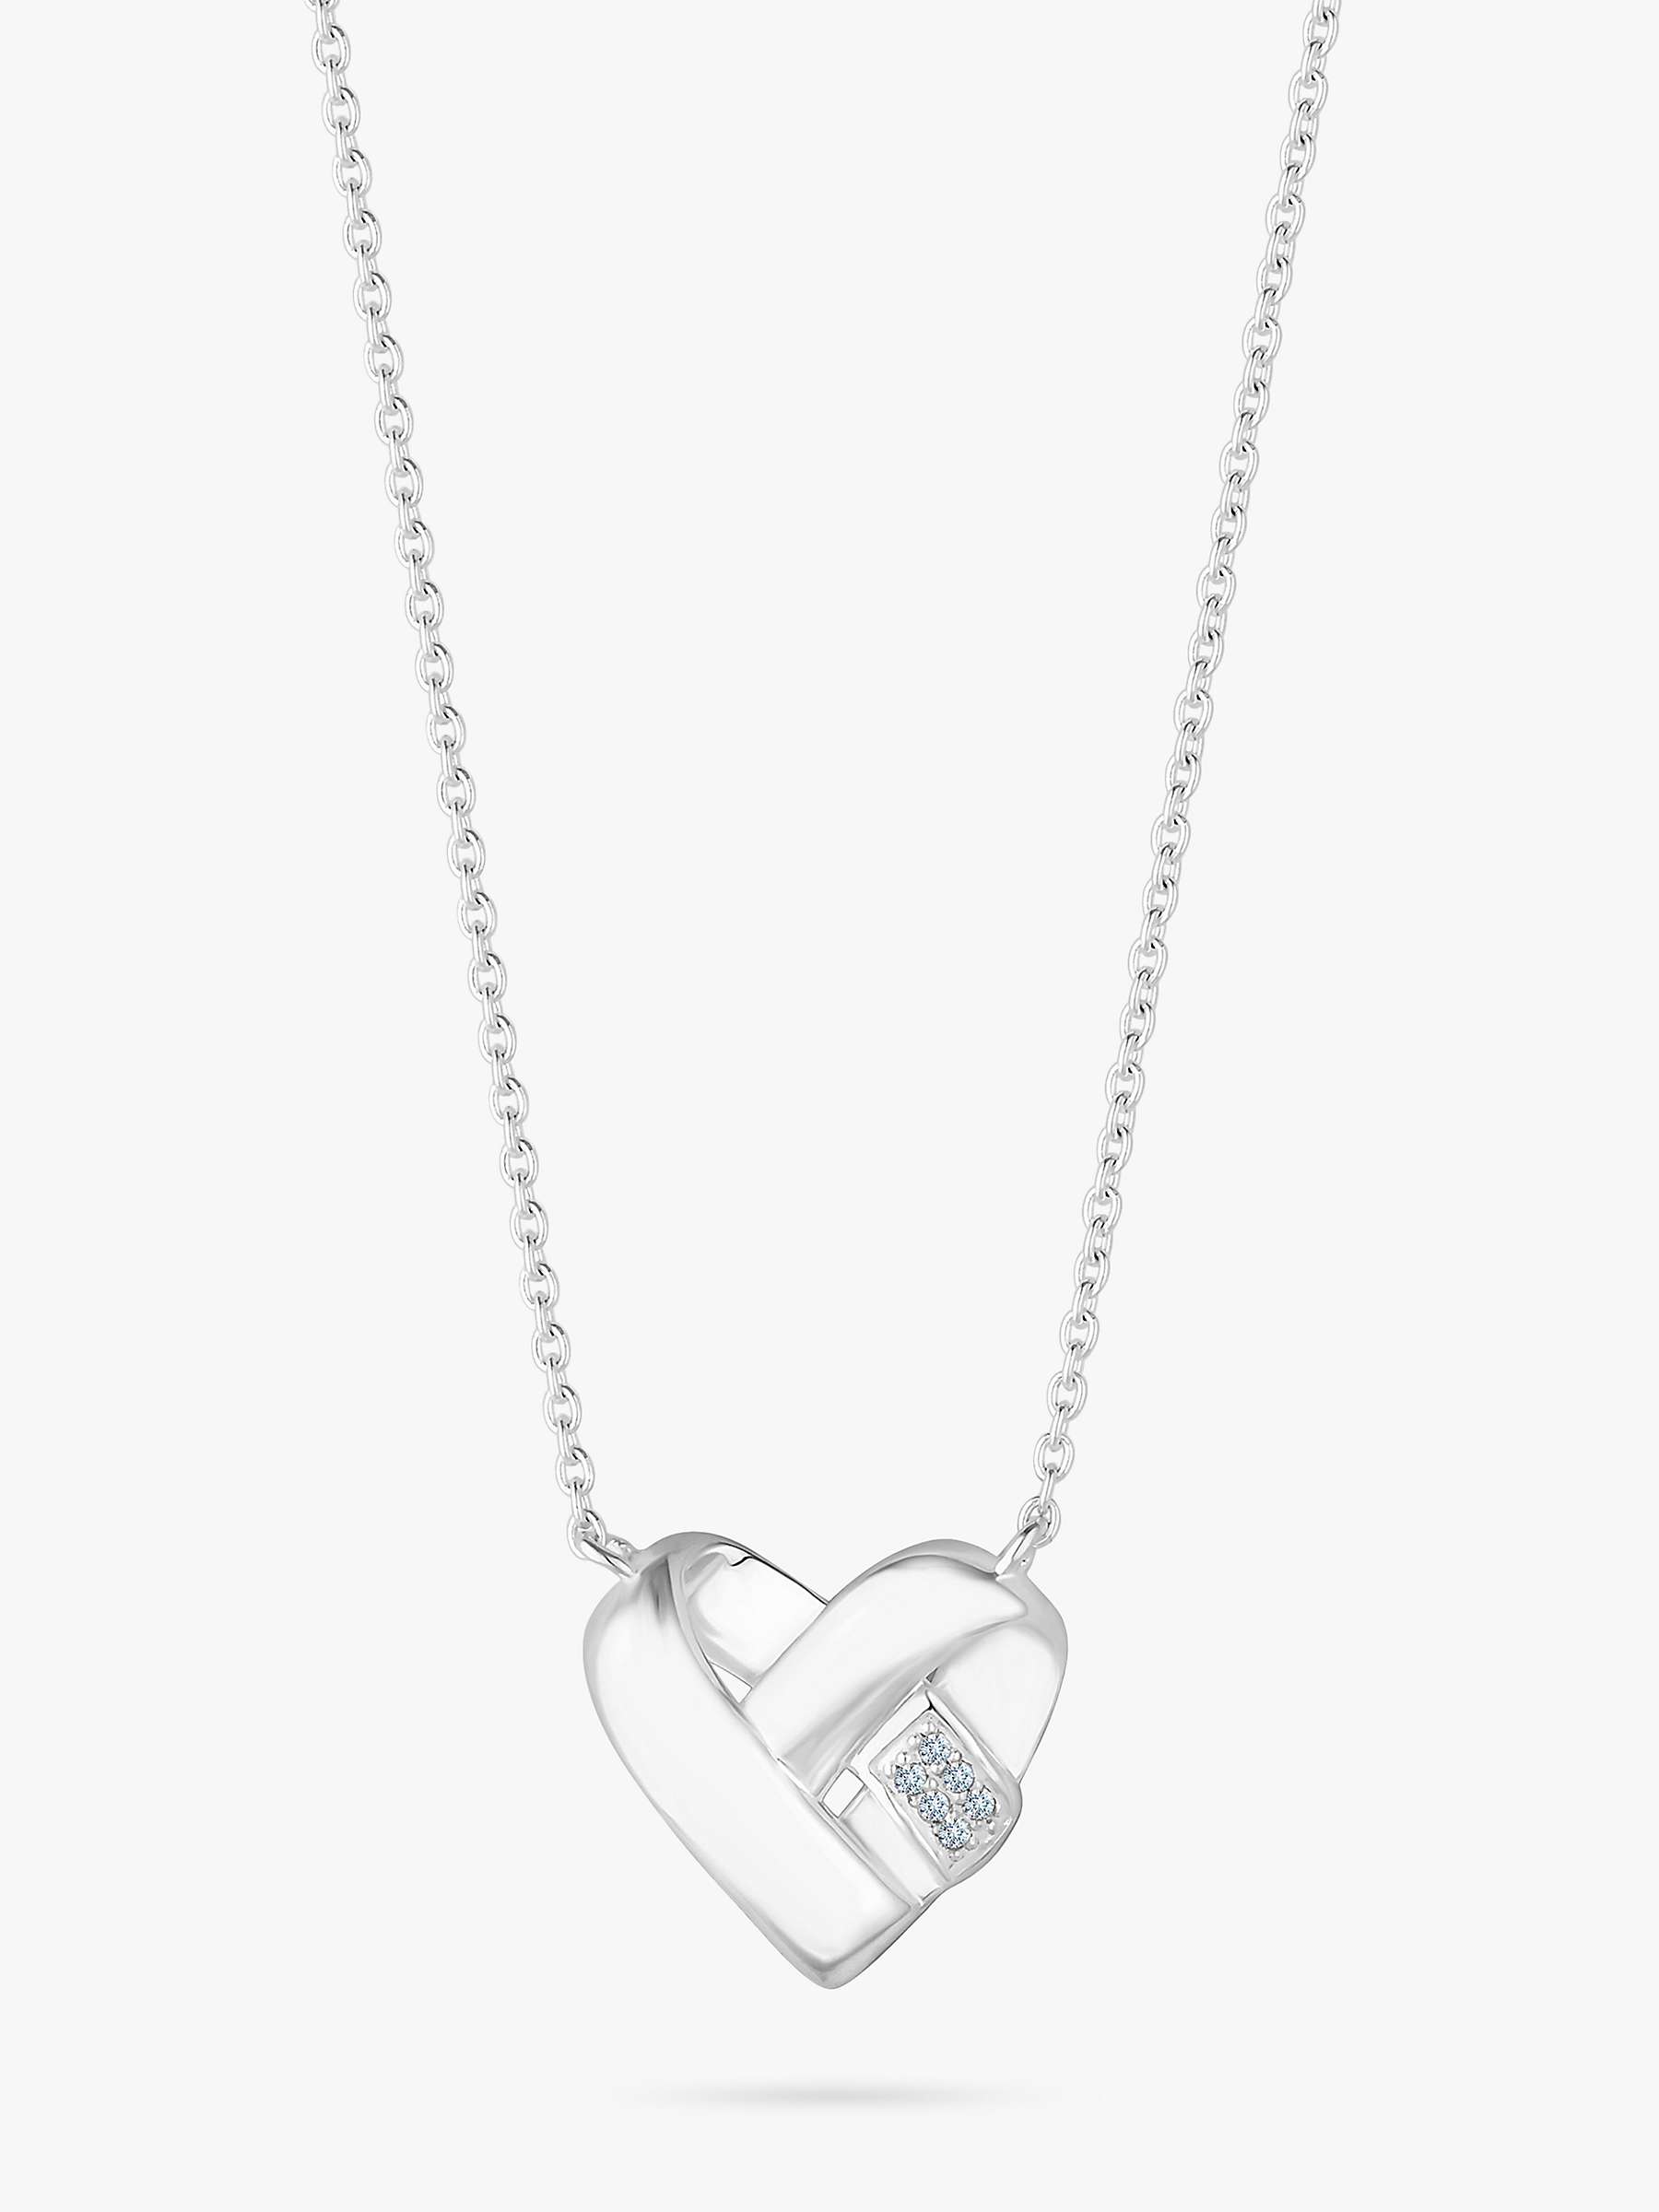 Buy Simply Silver Knotted Heart Pendant Necklace, Silver Online at johnlewis.com